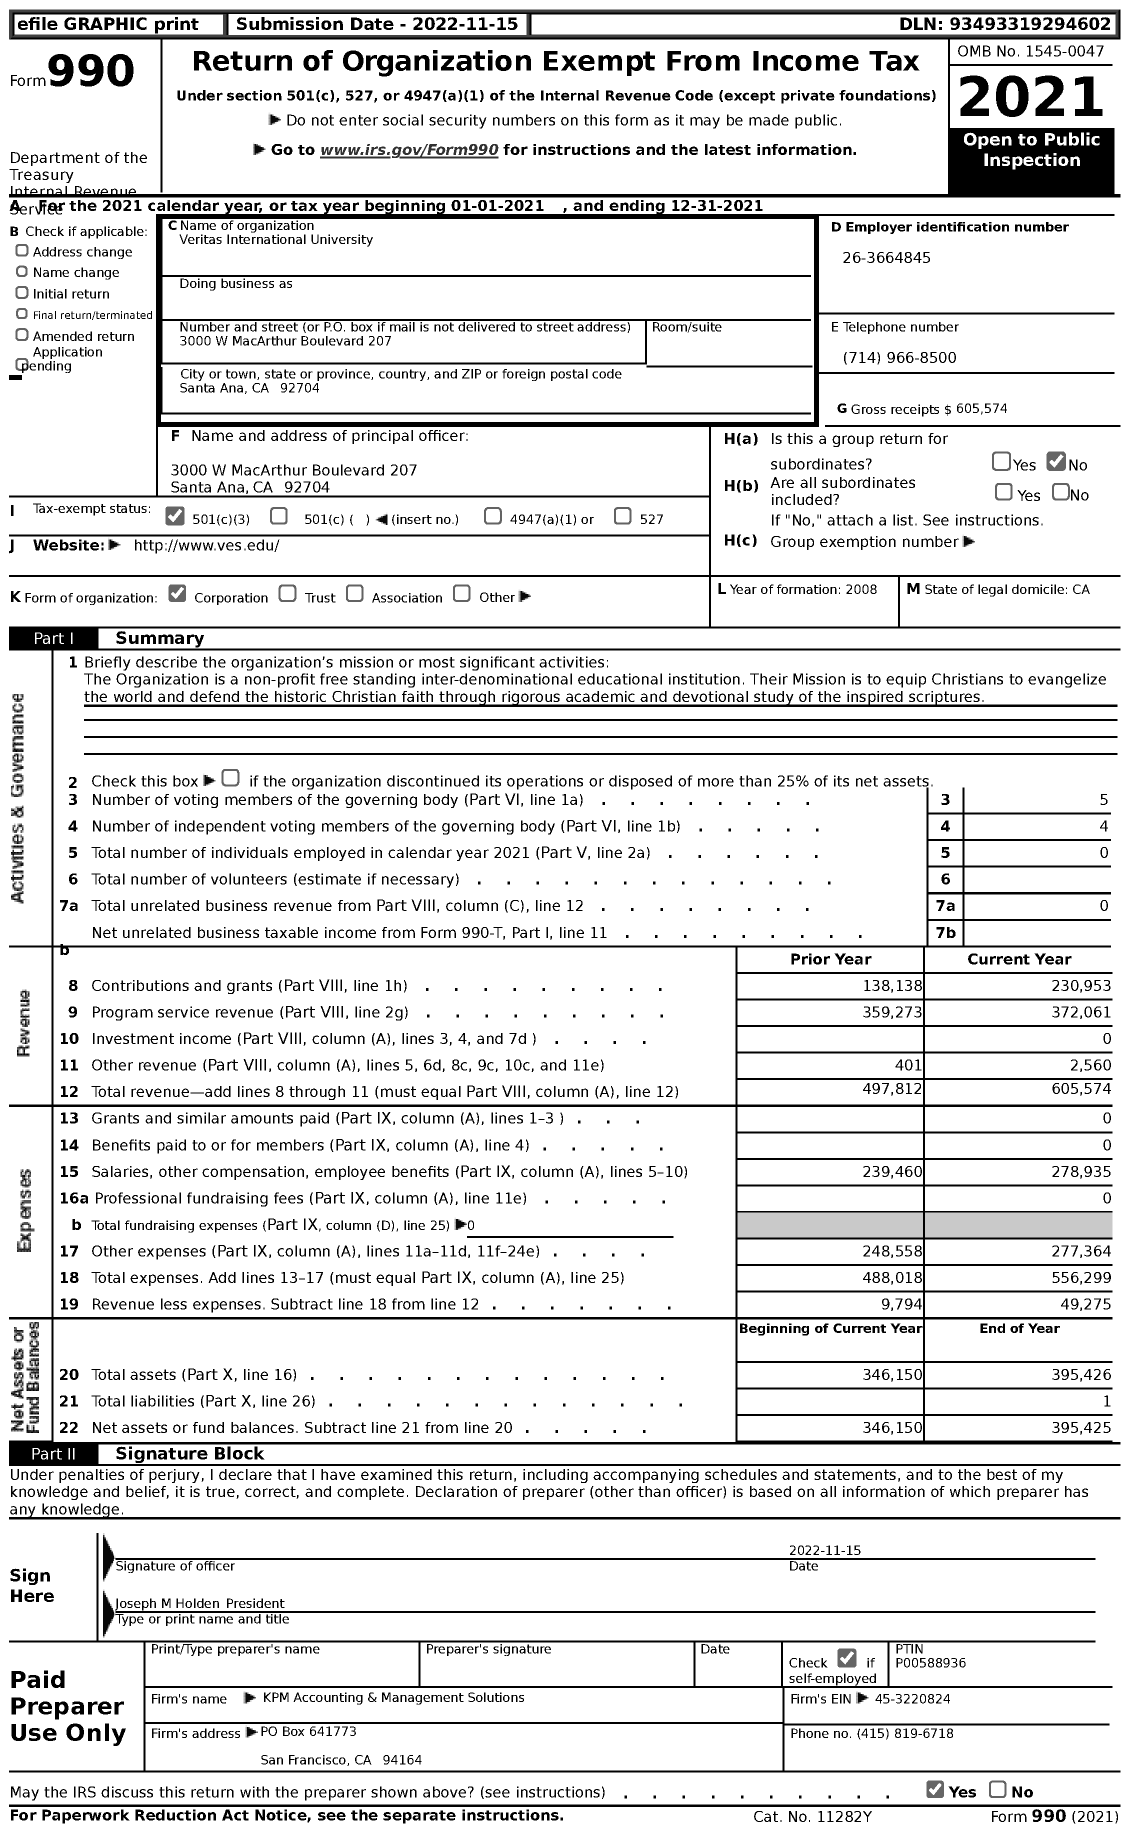 Image of first page of 2021 Form 990 for Veritas International University